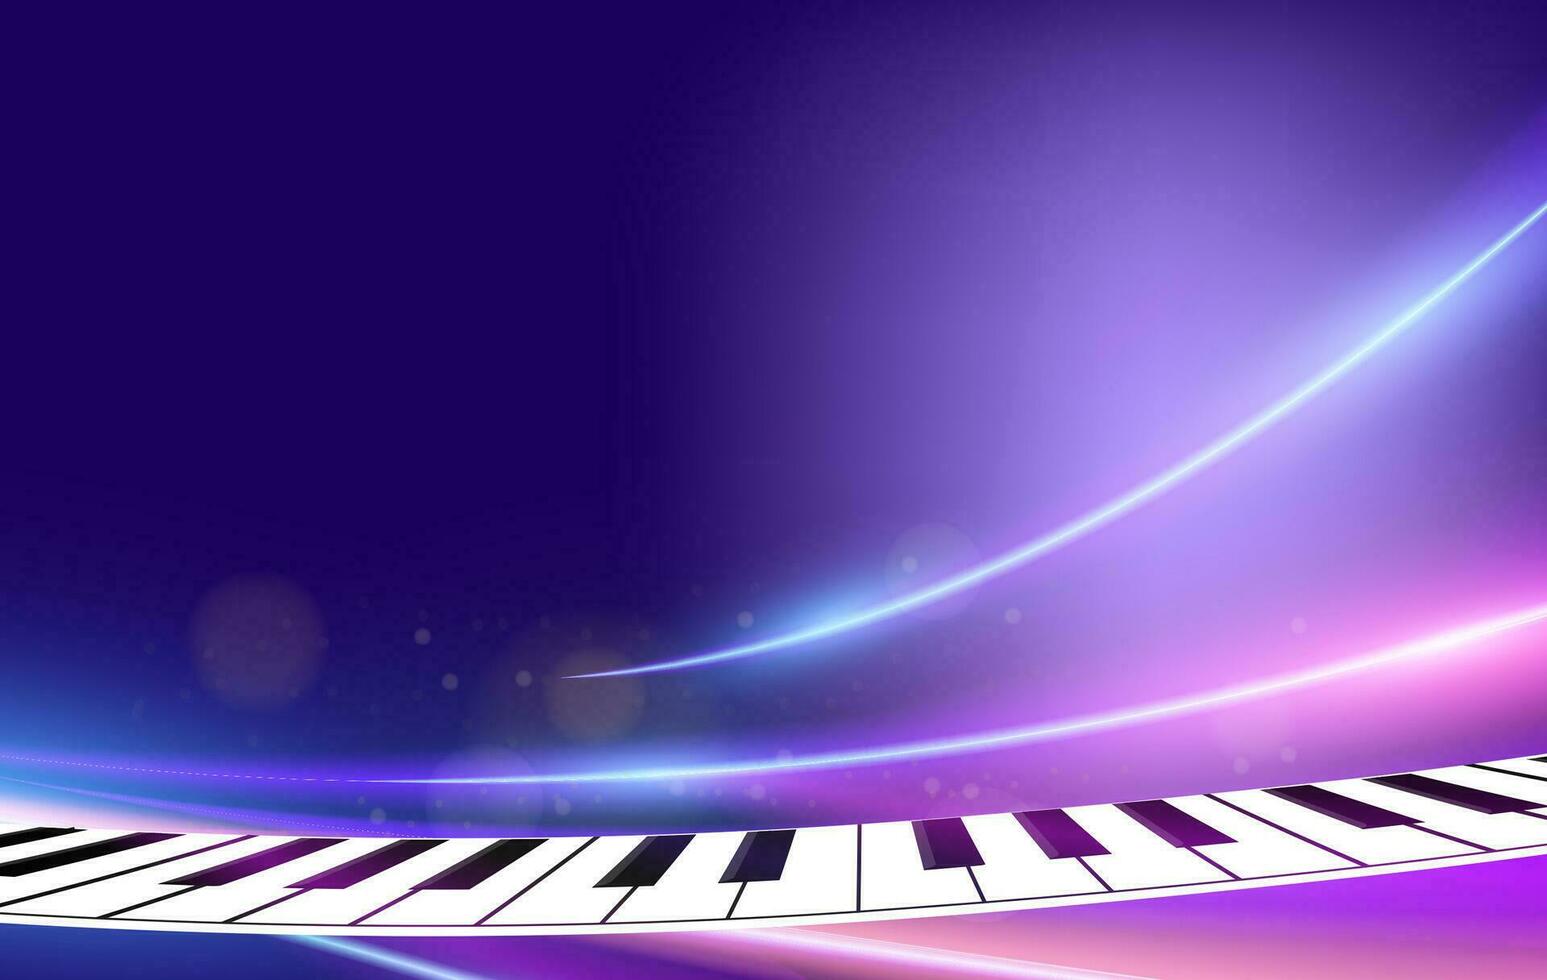 Curved piano keys atop purple beams and bokeh, used for cover art, music-related advertising posters. vector